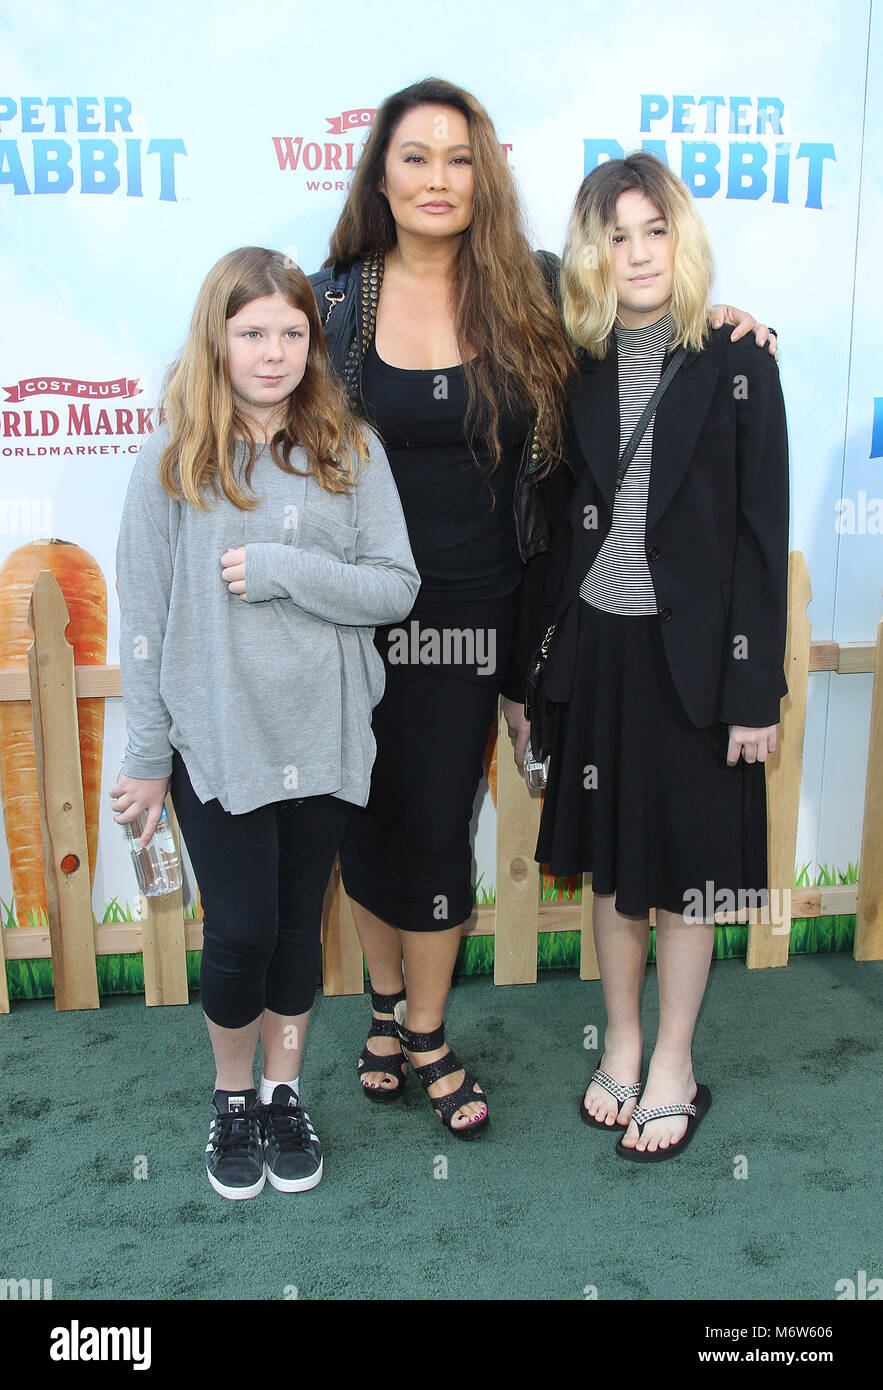 'Peter Rabbit' premieres at The Grove  Featuring: Tia Carrere, daughter Bianca Wakelin (right) Where: Los Angeles, California, United States When: 03 Feb 2018 Credit: Adriana M. Barraza/WENN.com Stock Photo